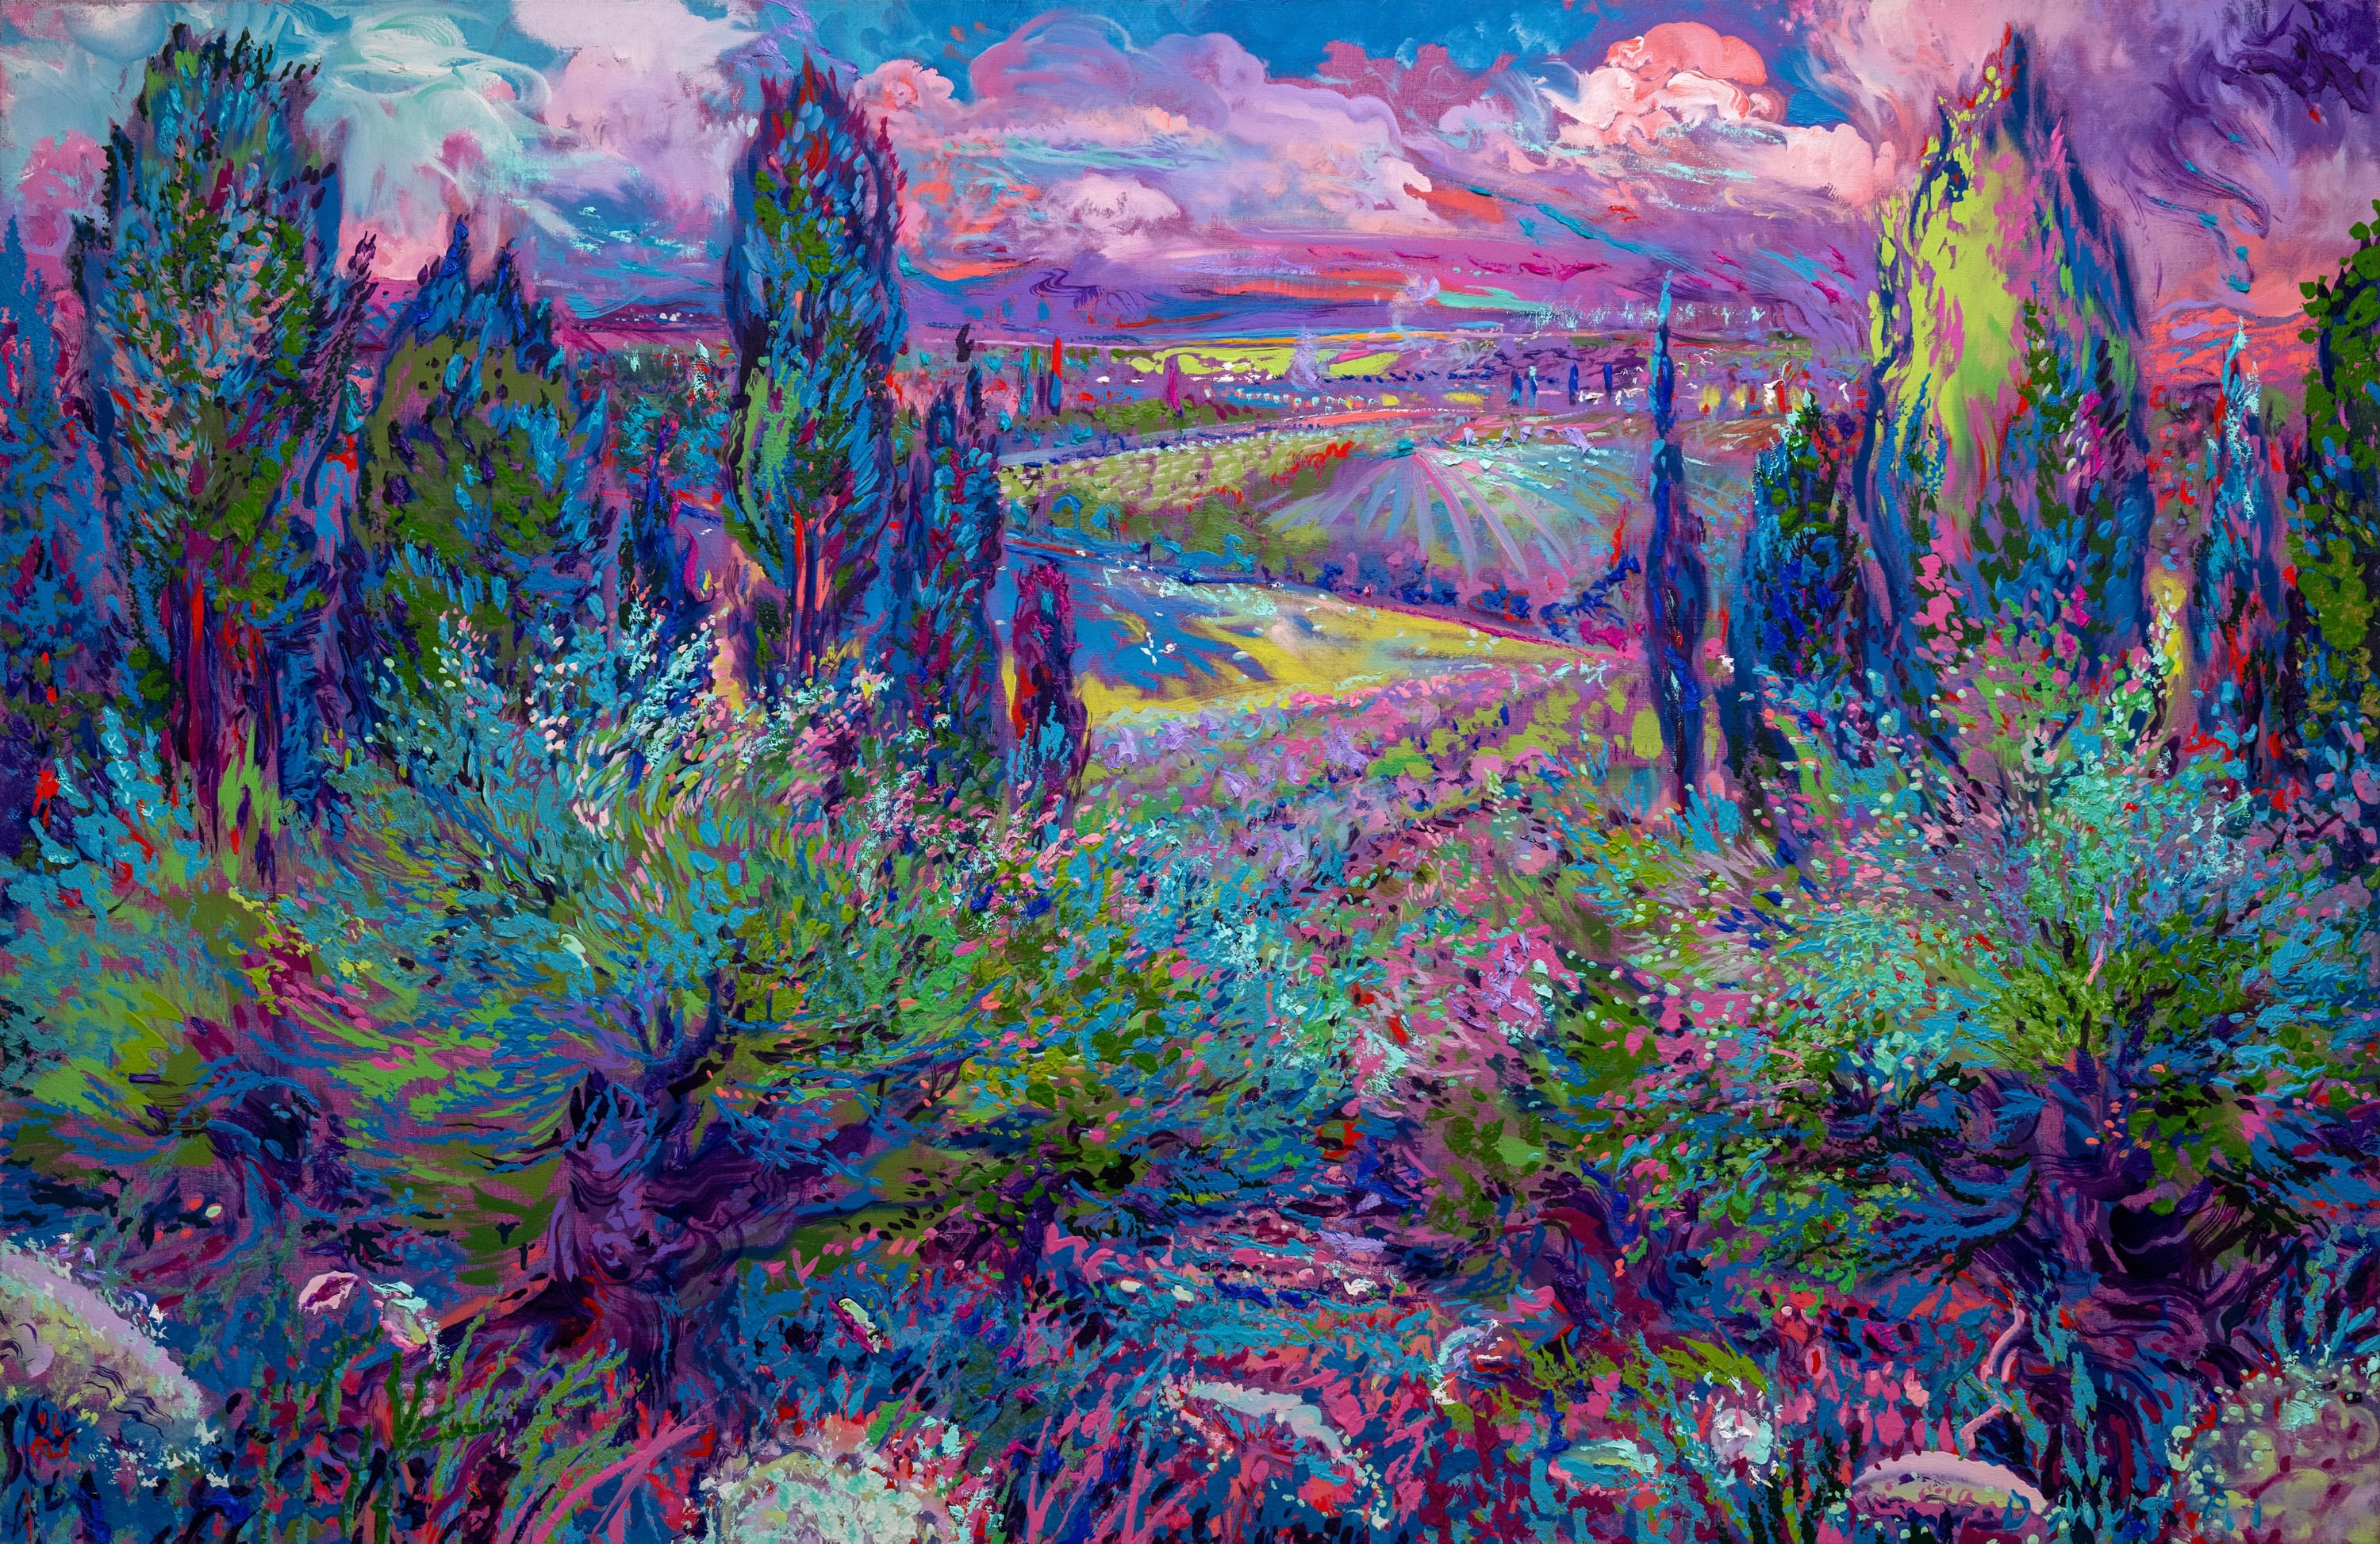 PROVENCAL Series:
“In [this] series I was exploring the classical influences of the impressionist masters, to build on their ideas to move them forward, yet being true to the many approaches from optical mixing, simultaneous contrast to be in